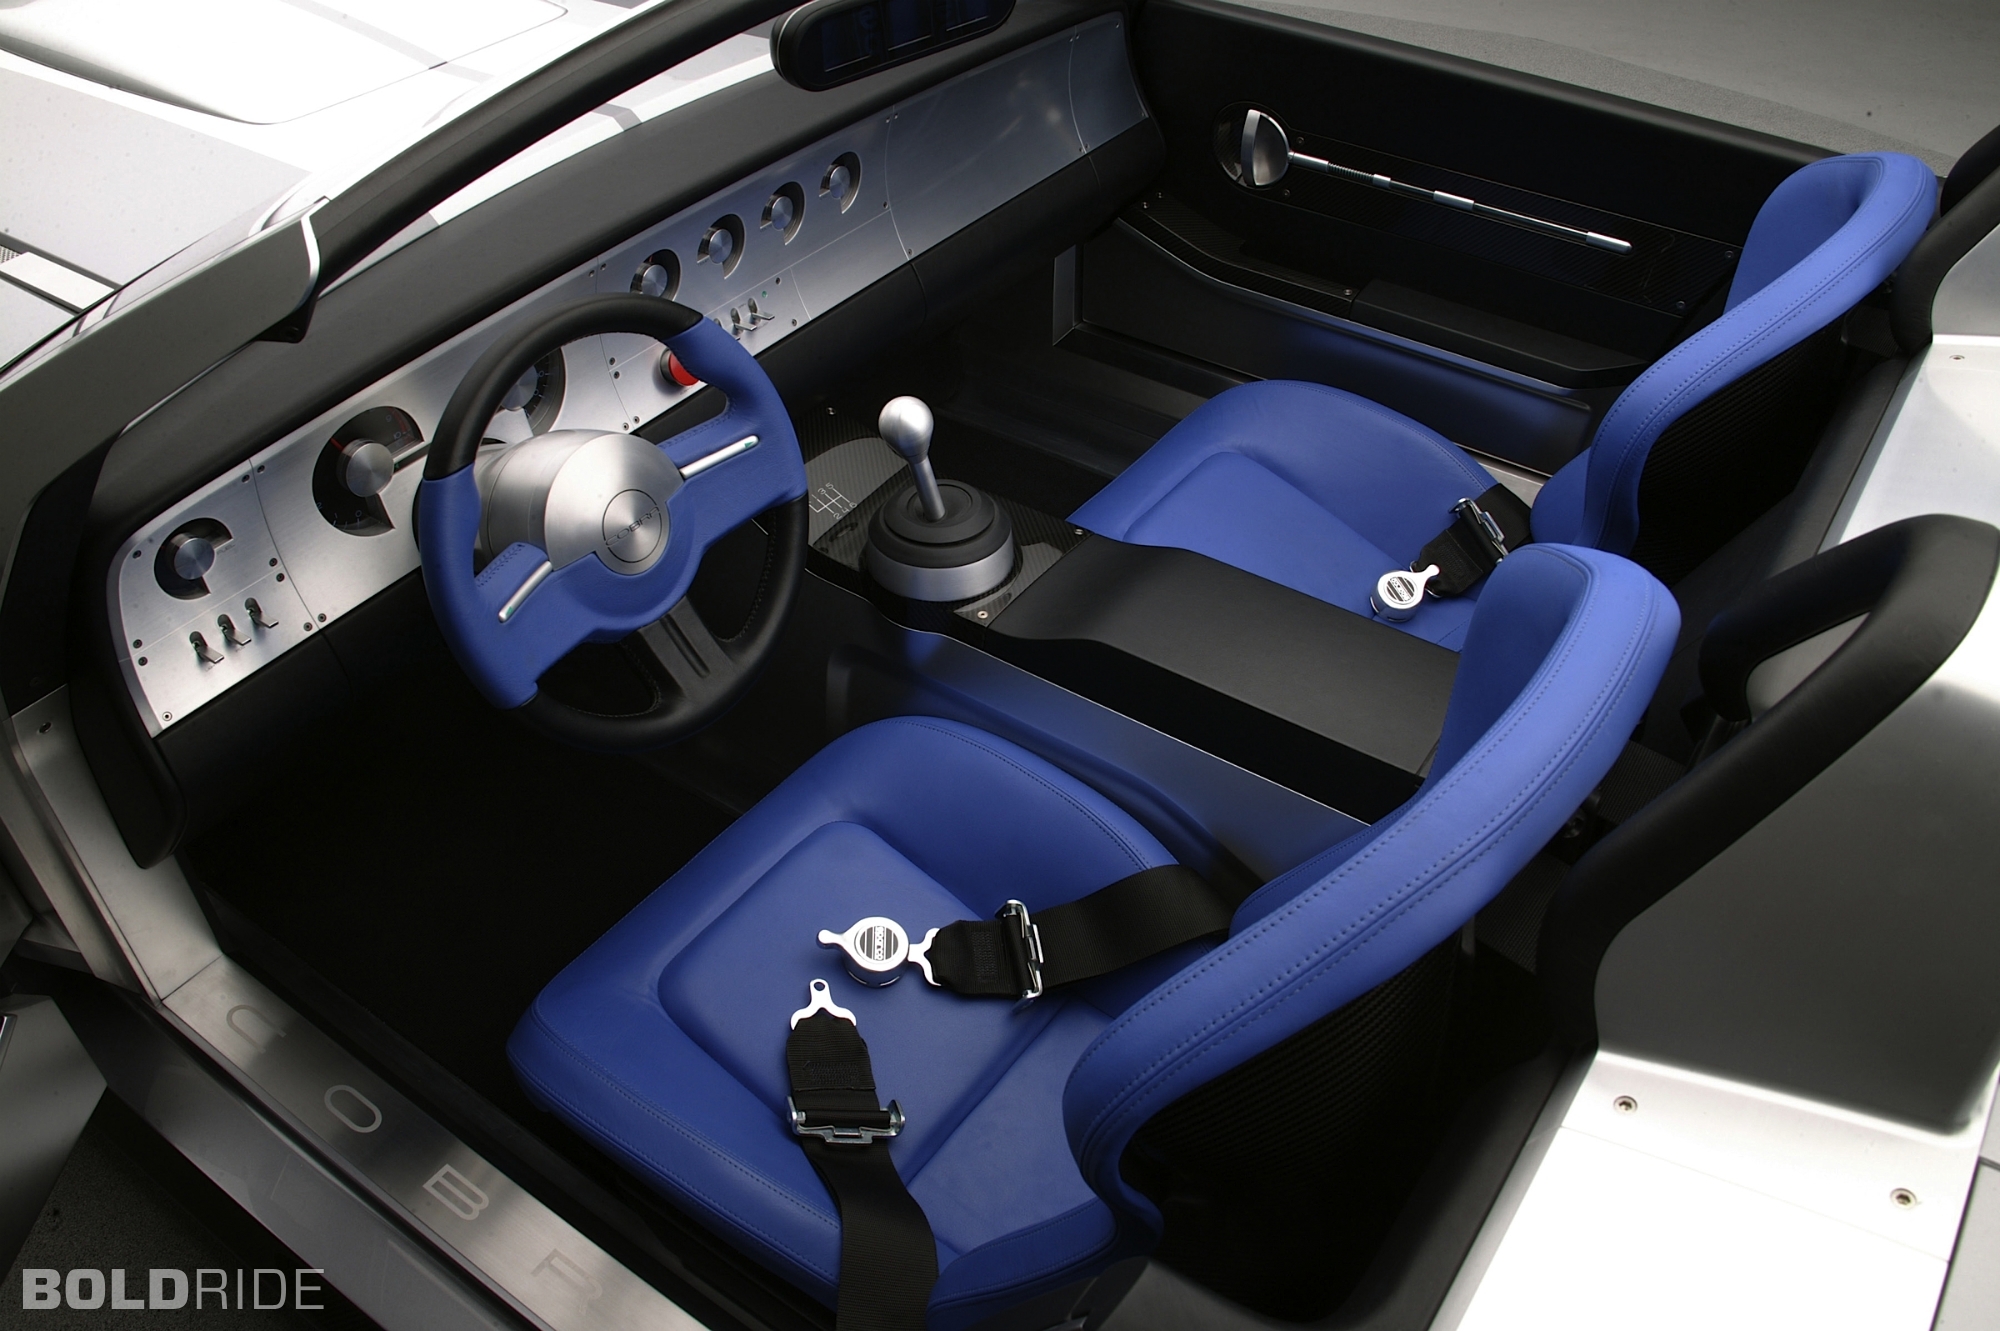 2004, Ford, Shelby, Cobra, Concept, Muscle, Supercar, Supercars, Interior Wallpaper